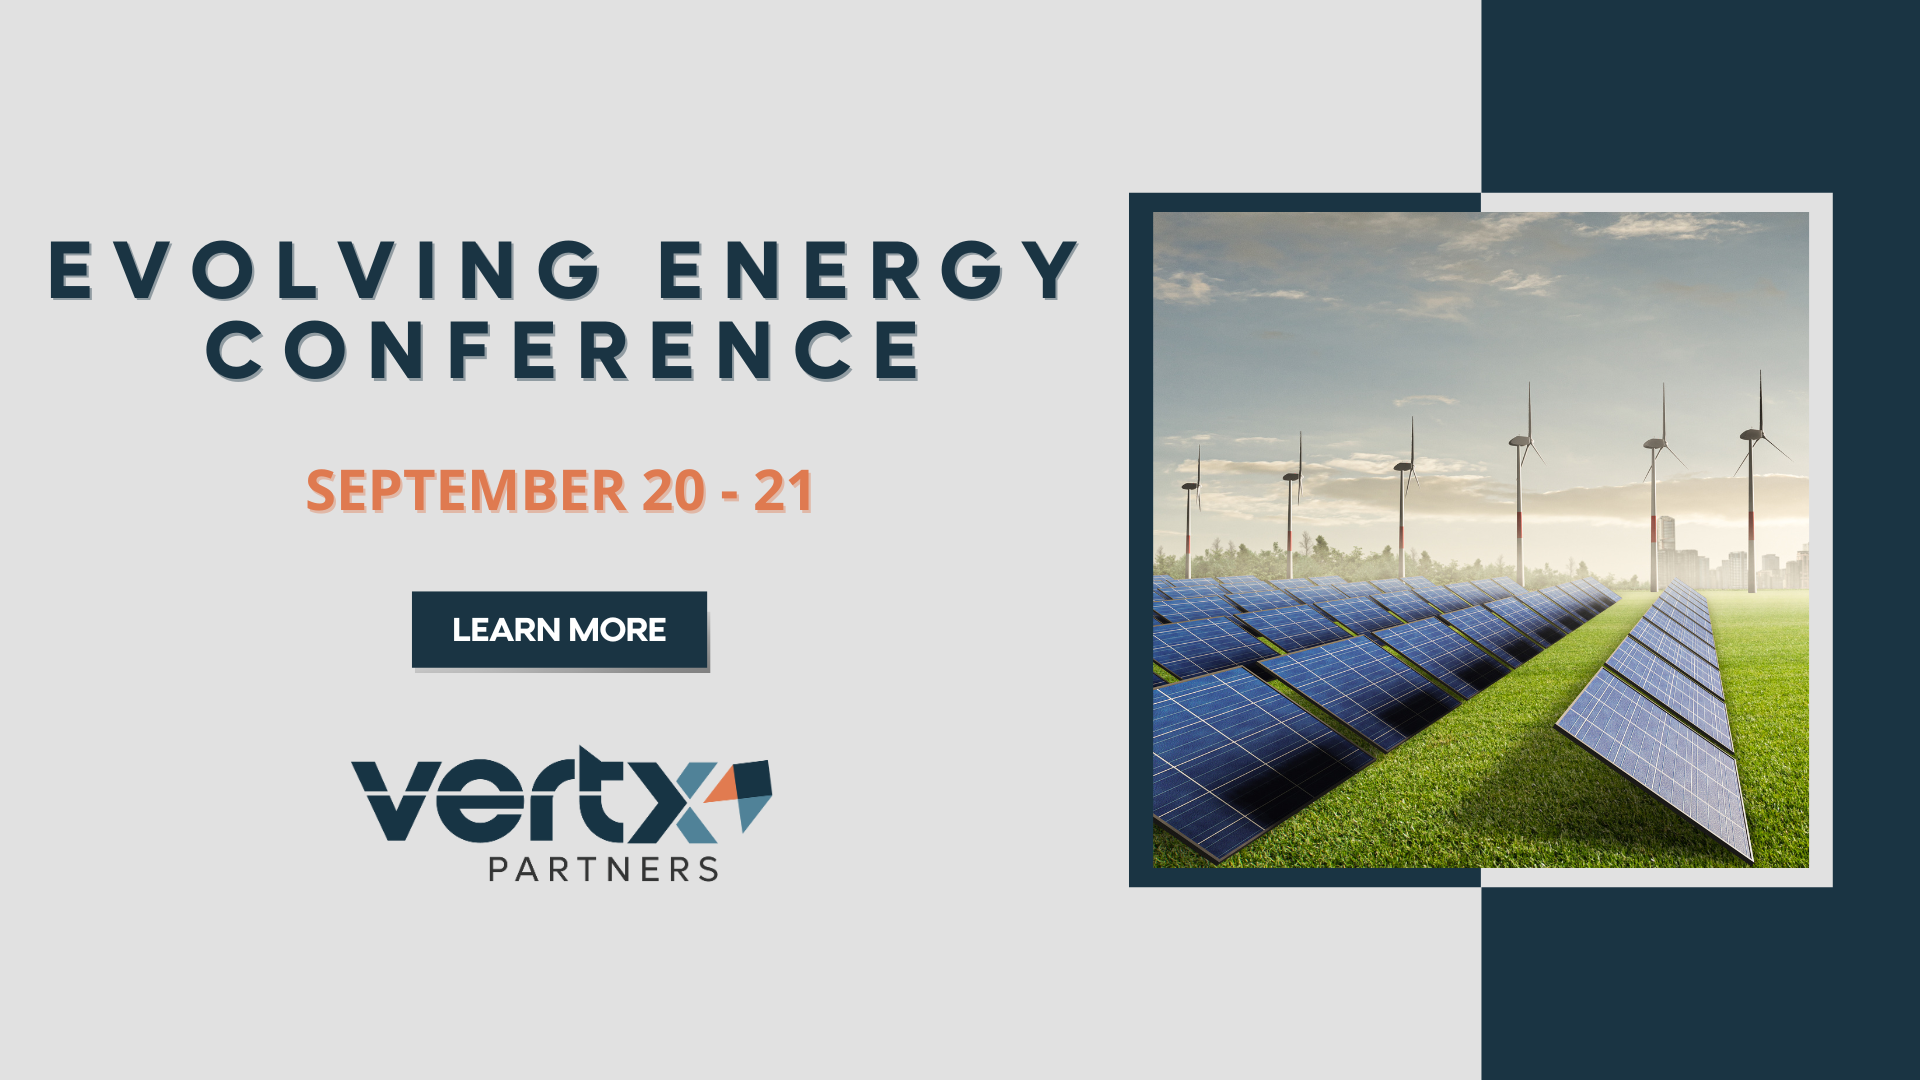 This graphic has the title "Evolving Energy Conference" with the date september 20-21 under it and a photo of solar panels with windmills in the background.